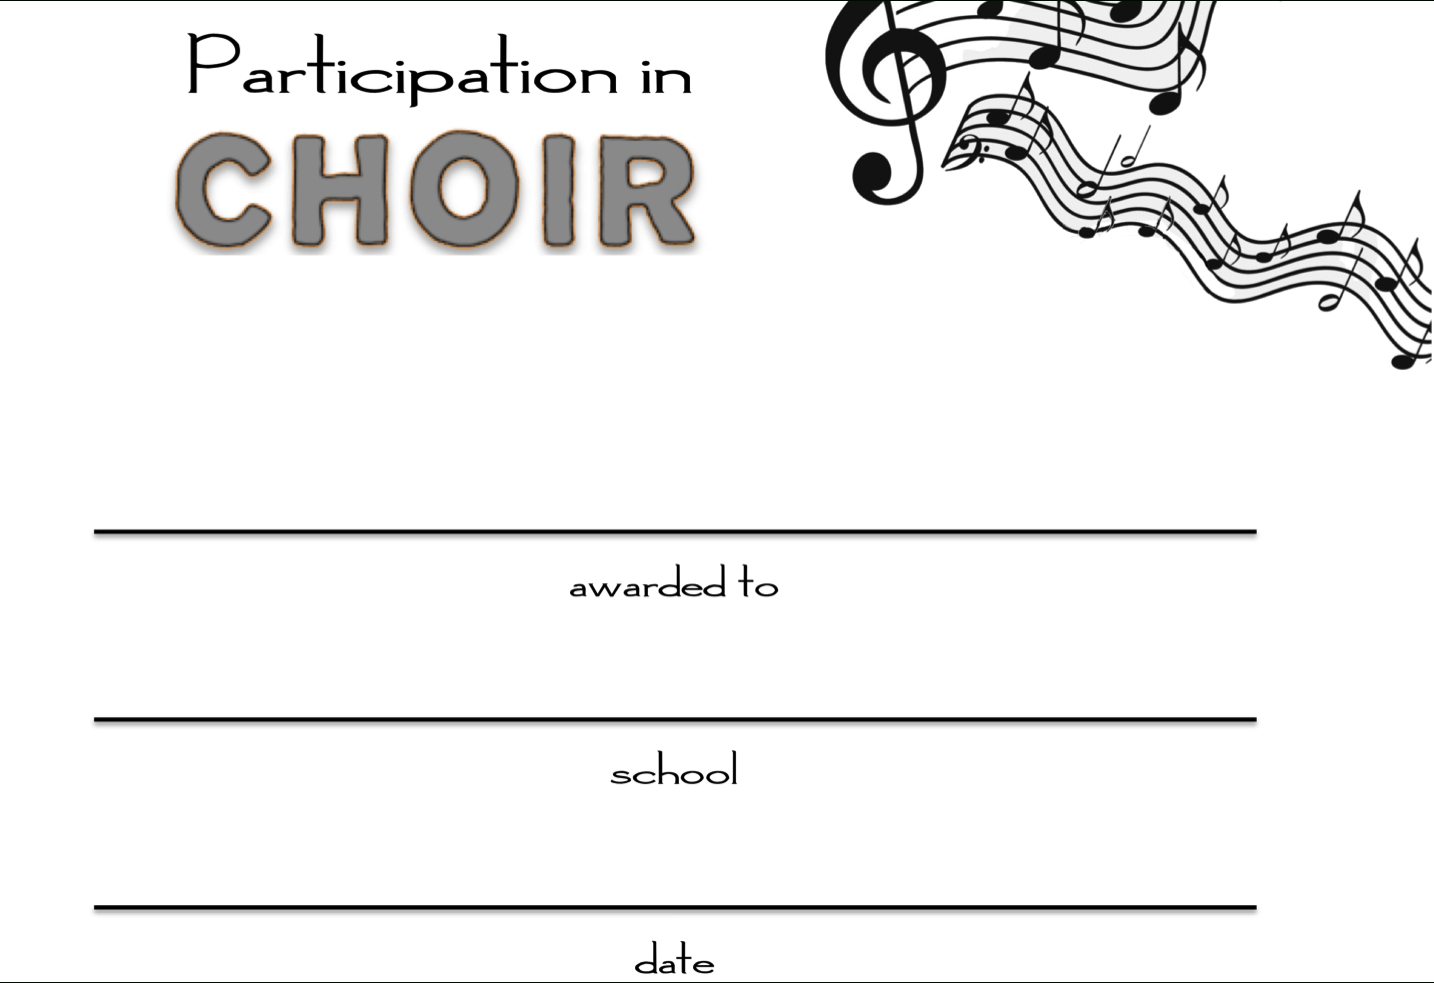 8+ Free Choir Certificate Of Participation Templates – Pdf Intended For Certificate Of Participation Template Pdf